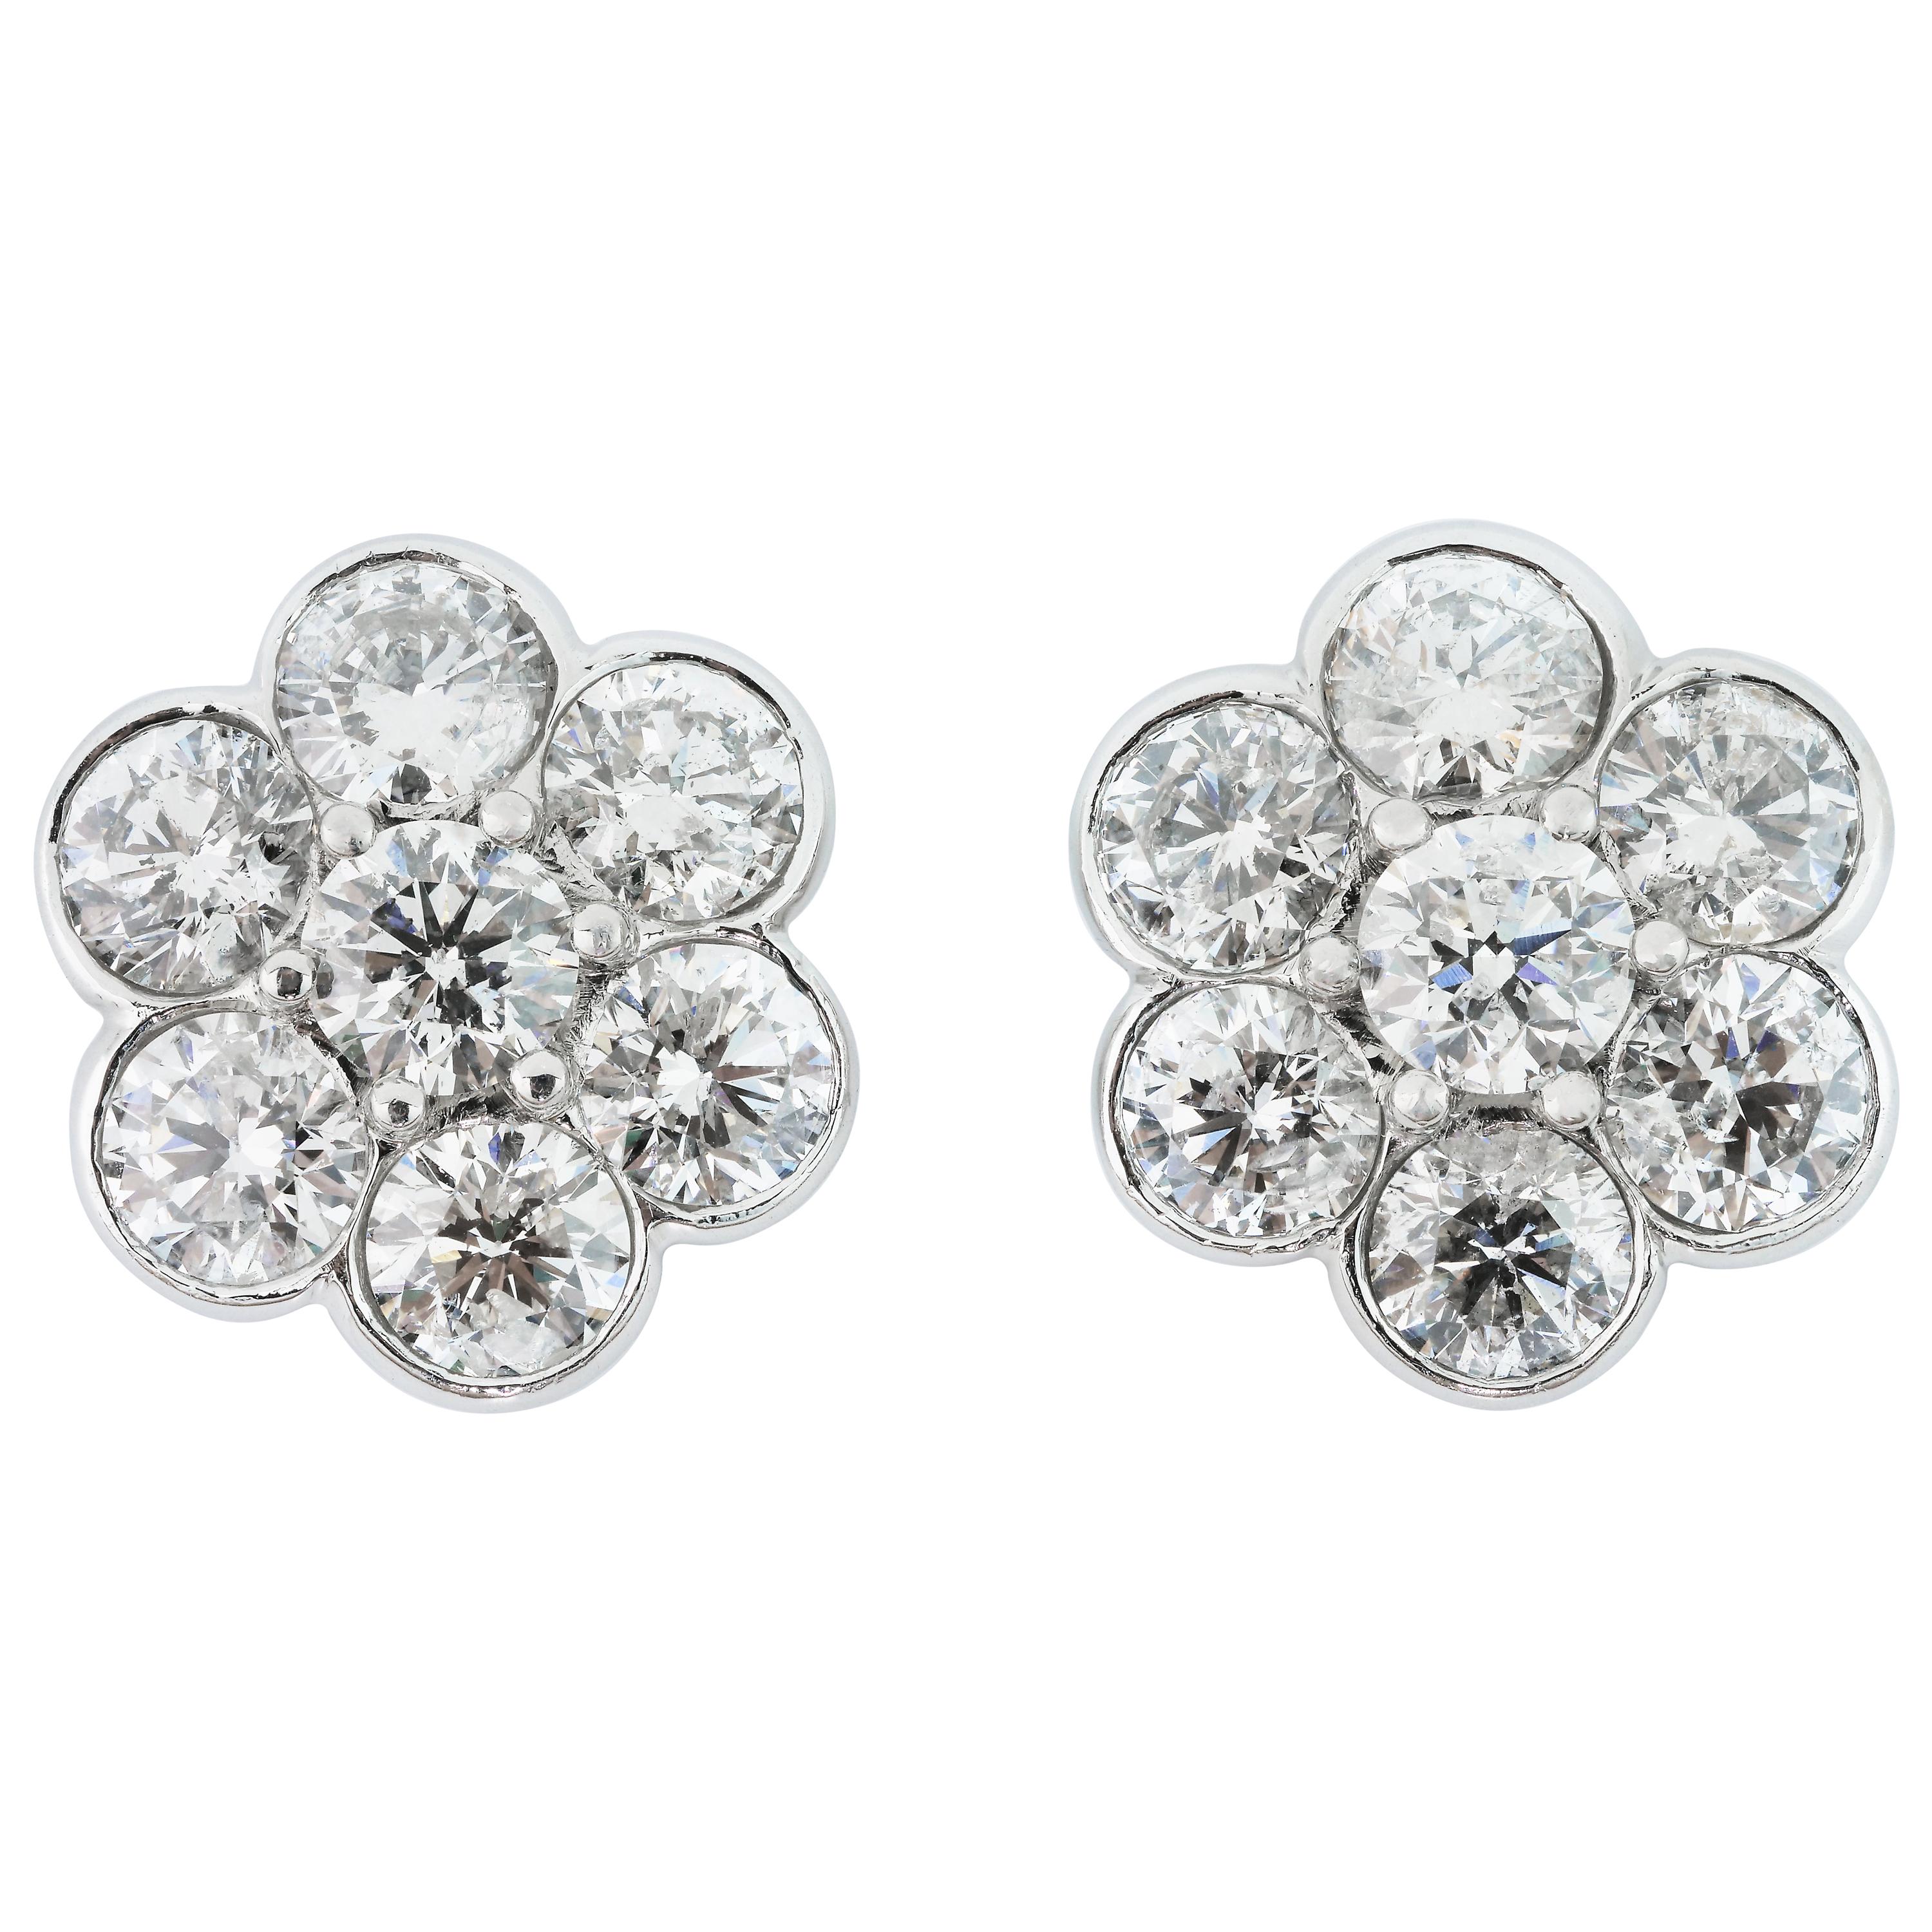 Round Brilliant Cut Diamonds Classic Cluster Stud Earrings in Rub over Setting